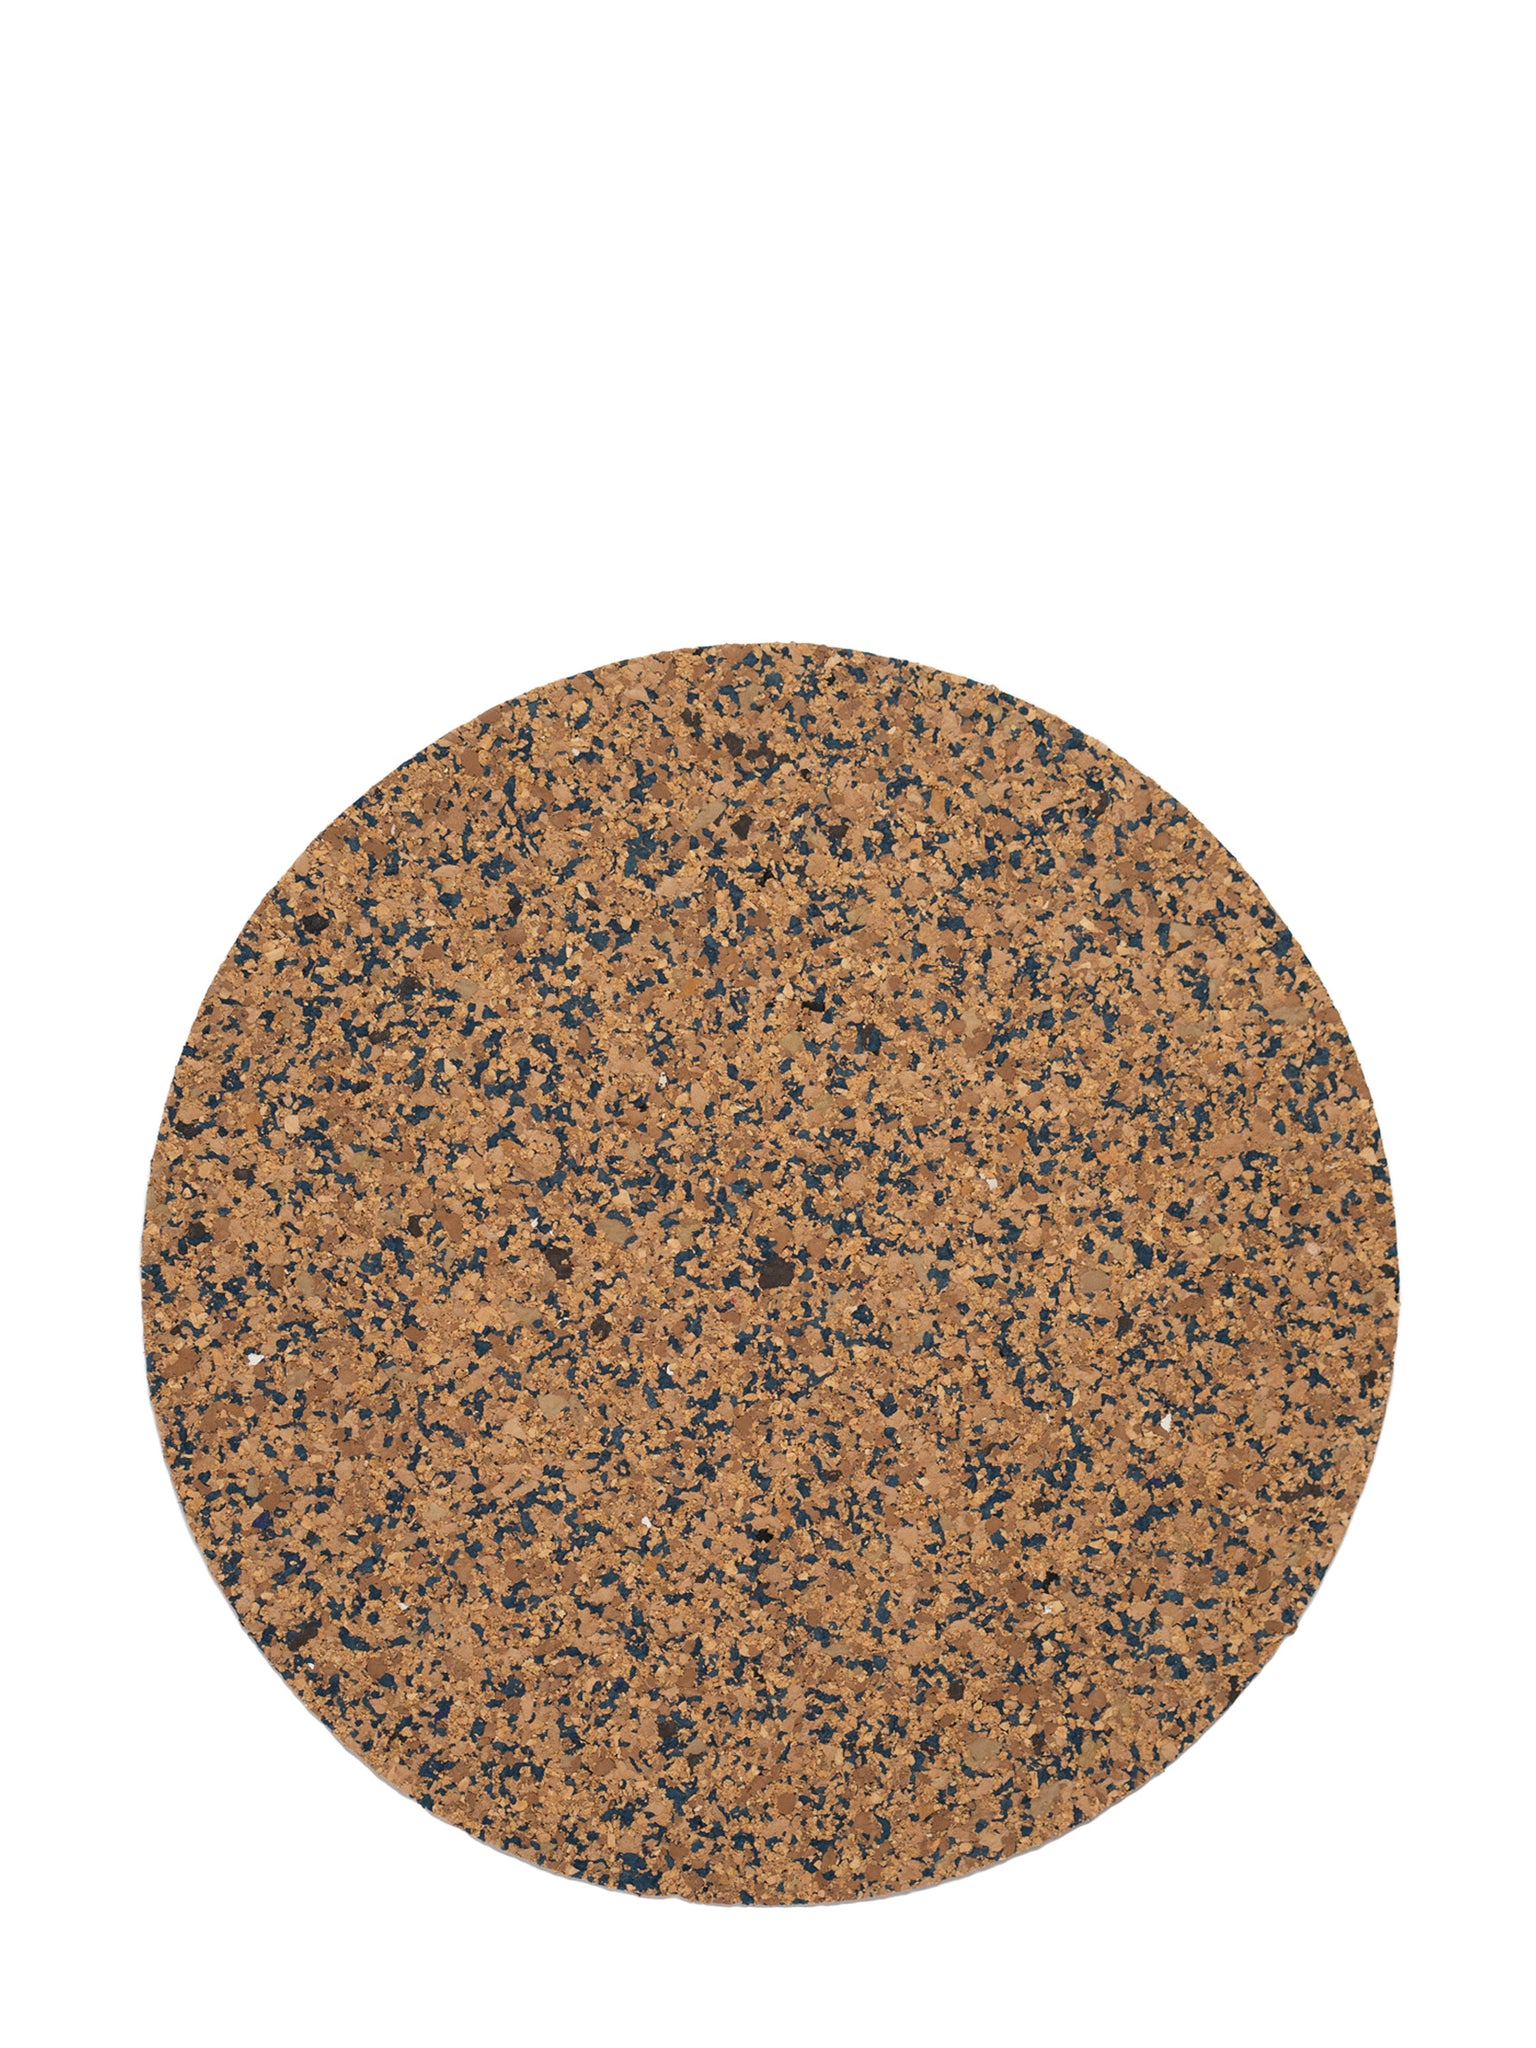 eco navy recycled rounds cork placemat by Yod&CO